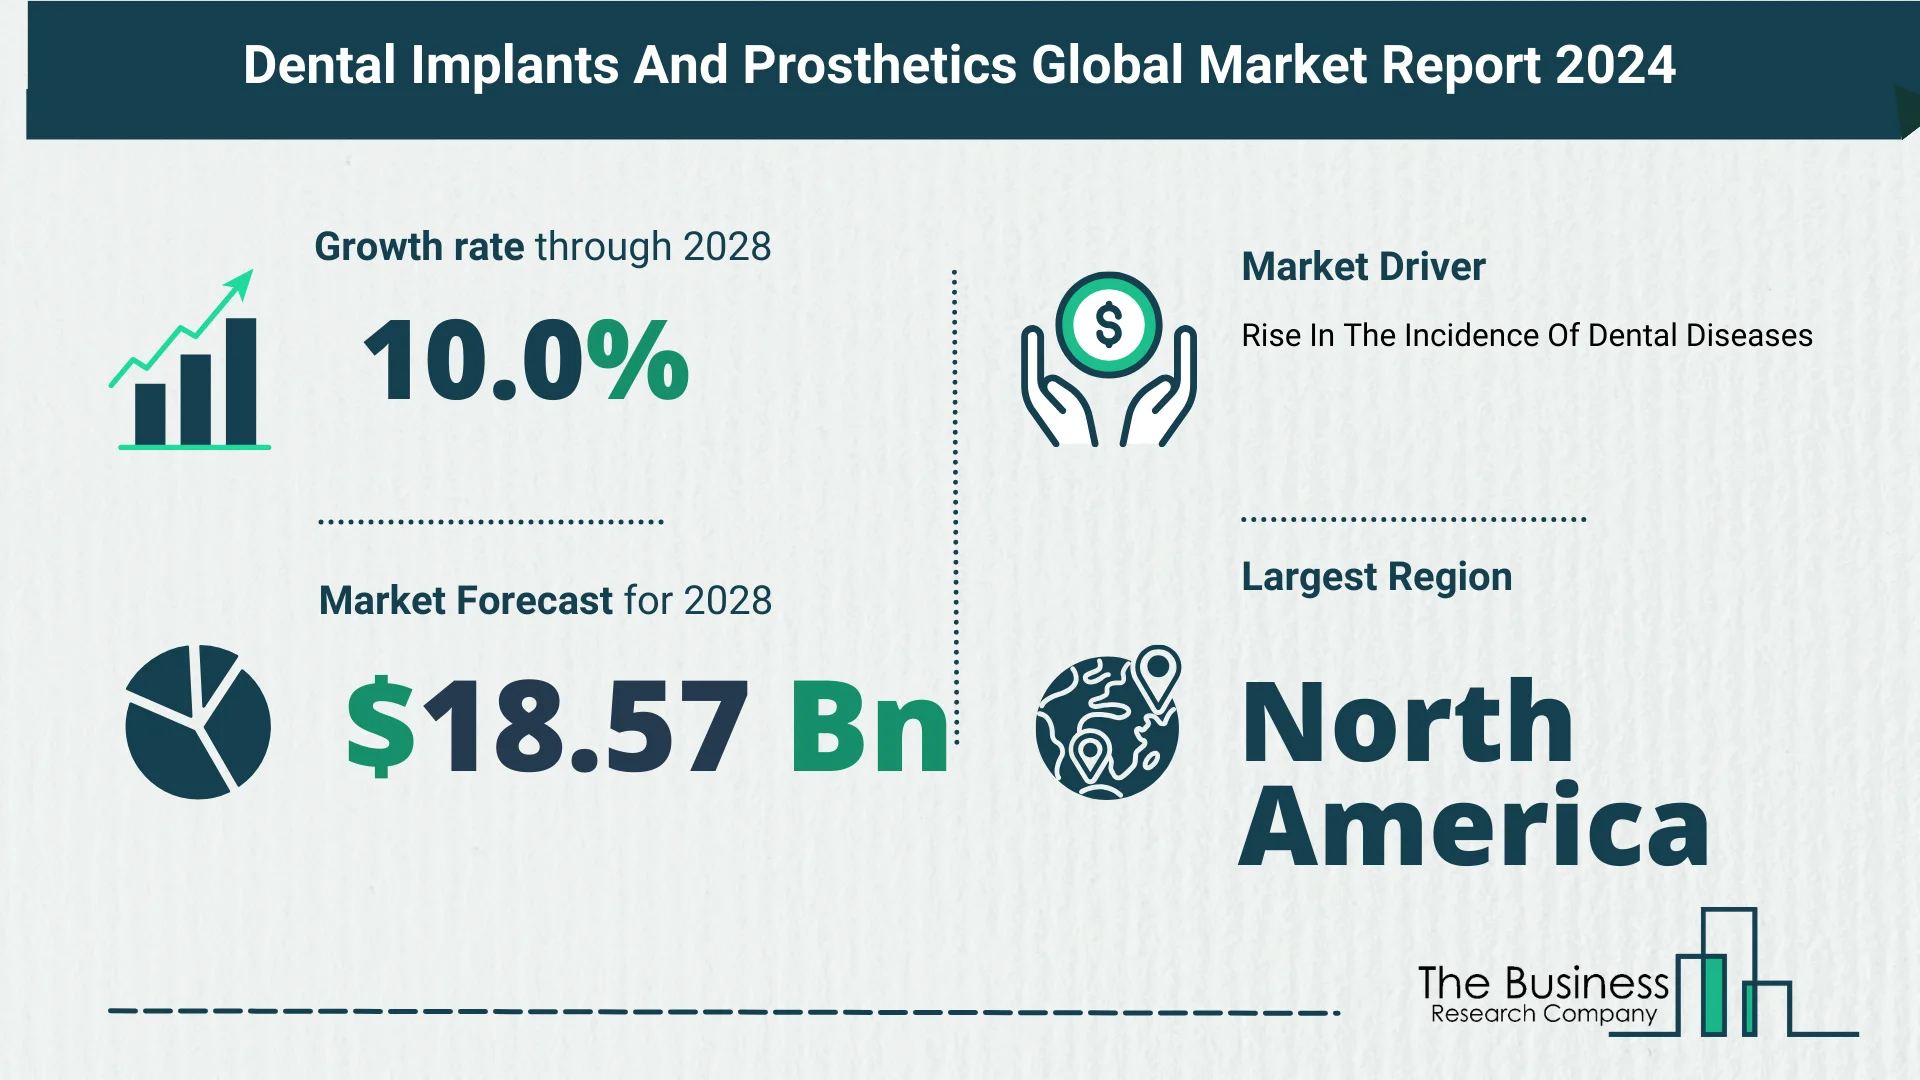 How Is The Dental Implants And Prosthetics Market Expected To Grow Through 2024-2033